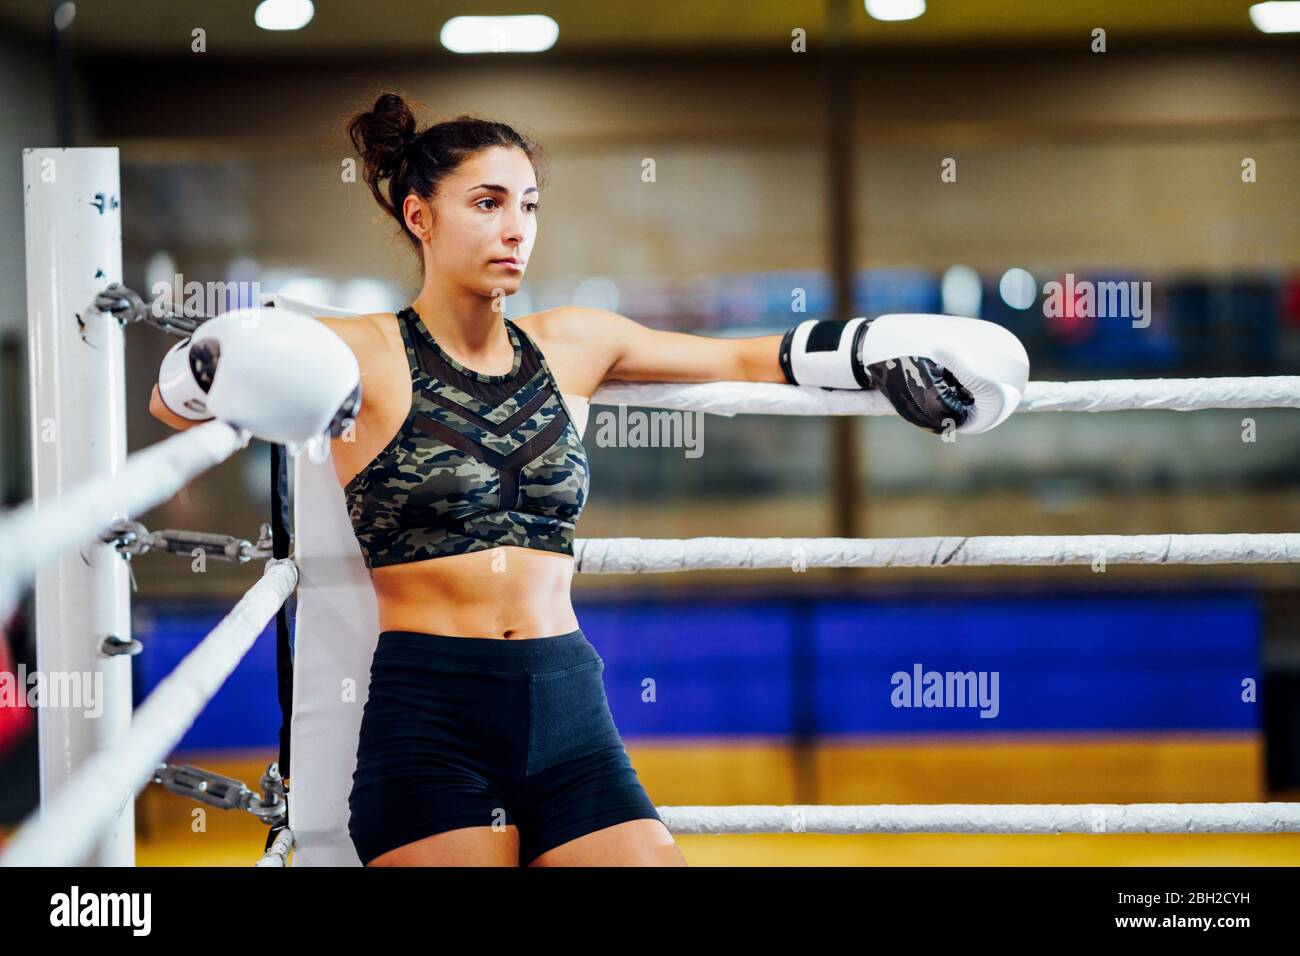 Athletic female boxer in boxing ring leaning on rope in the corner Stock Photo